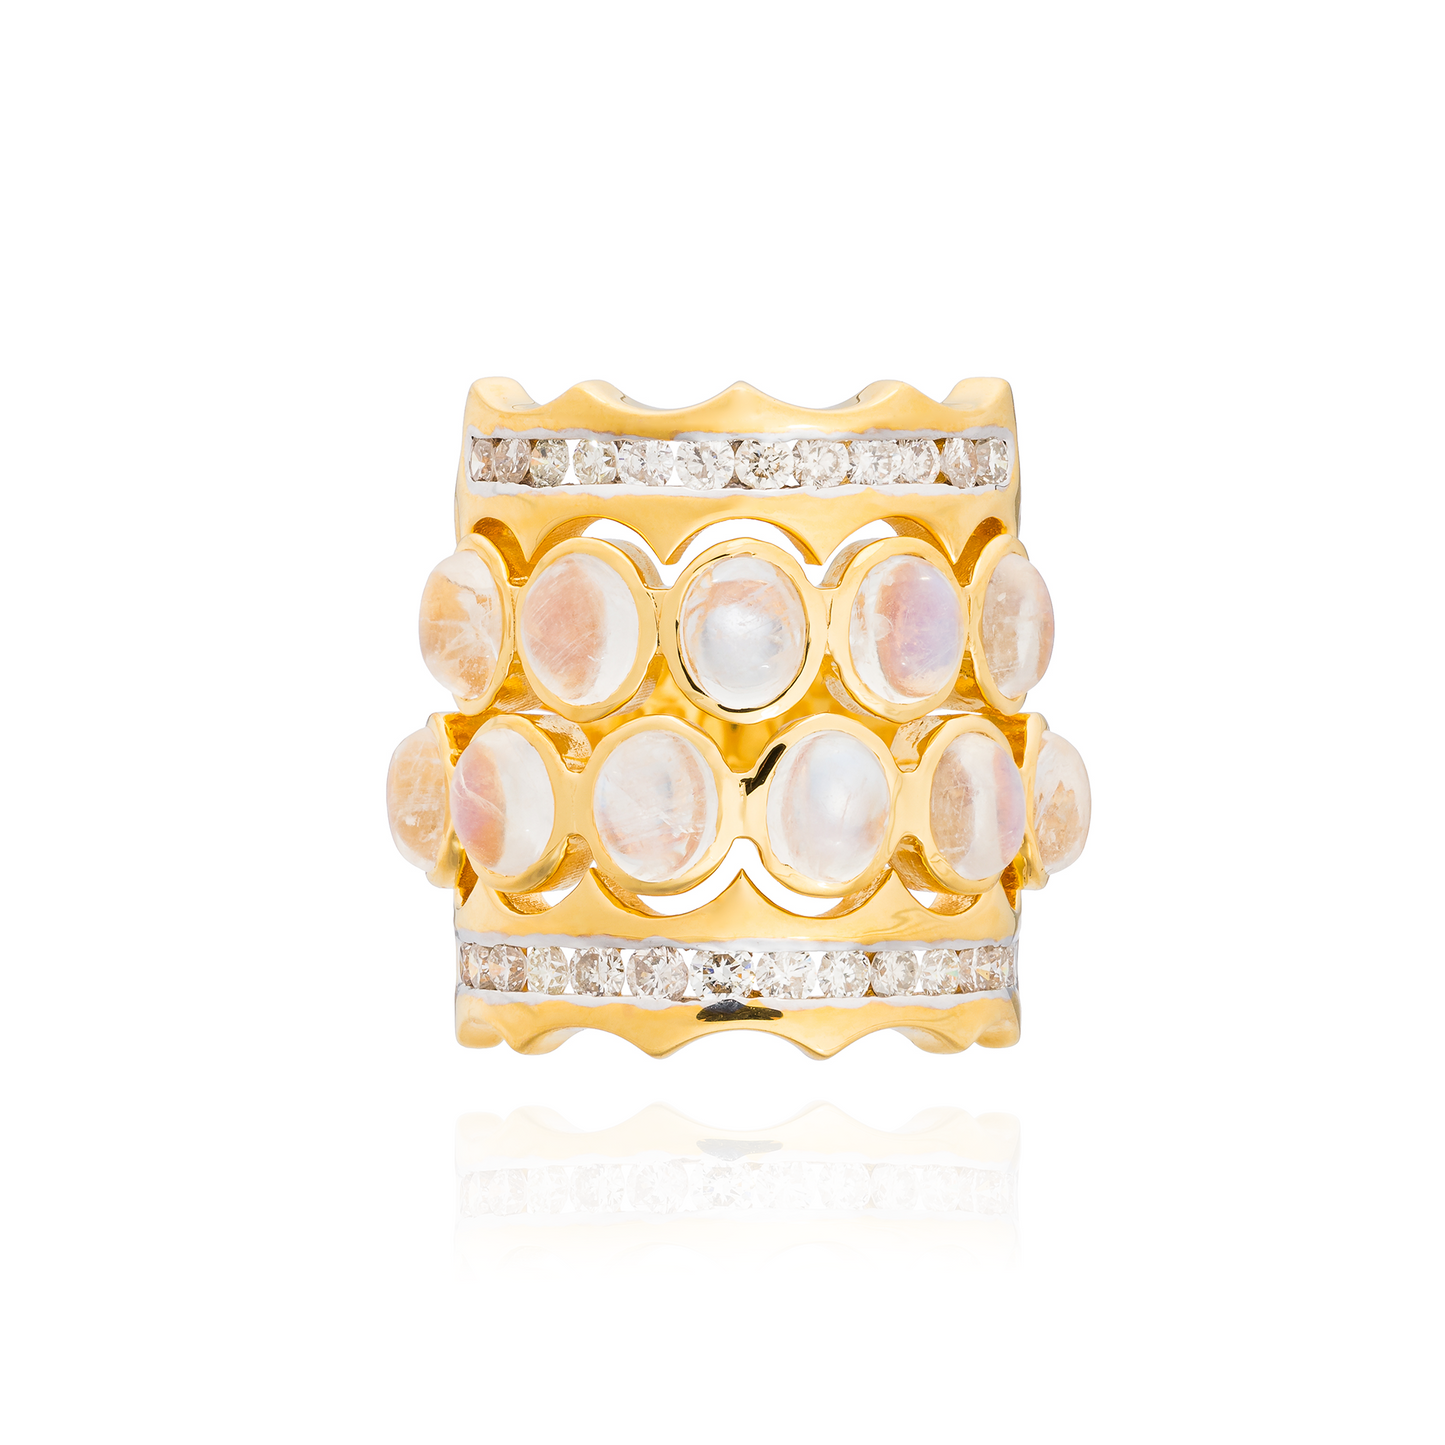 Iconic Wave 18K Yellow Gold Ring with Moonstone Cabochons & White Diamonds